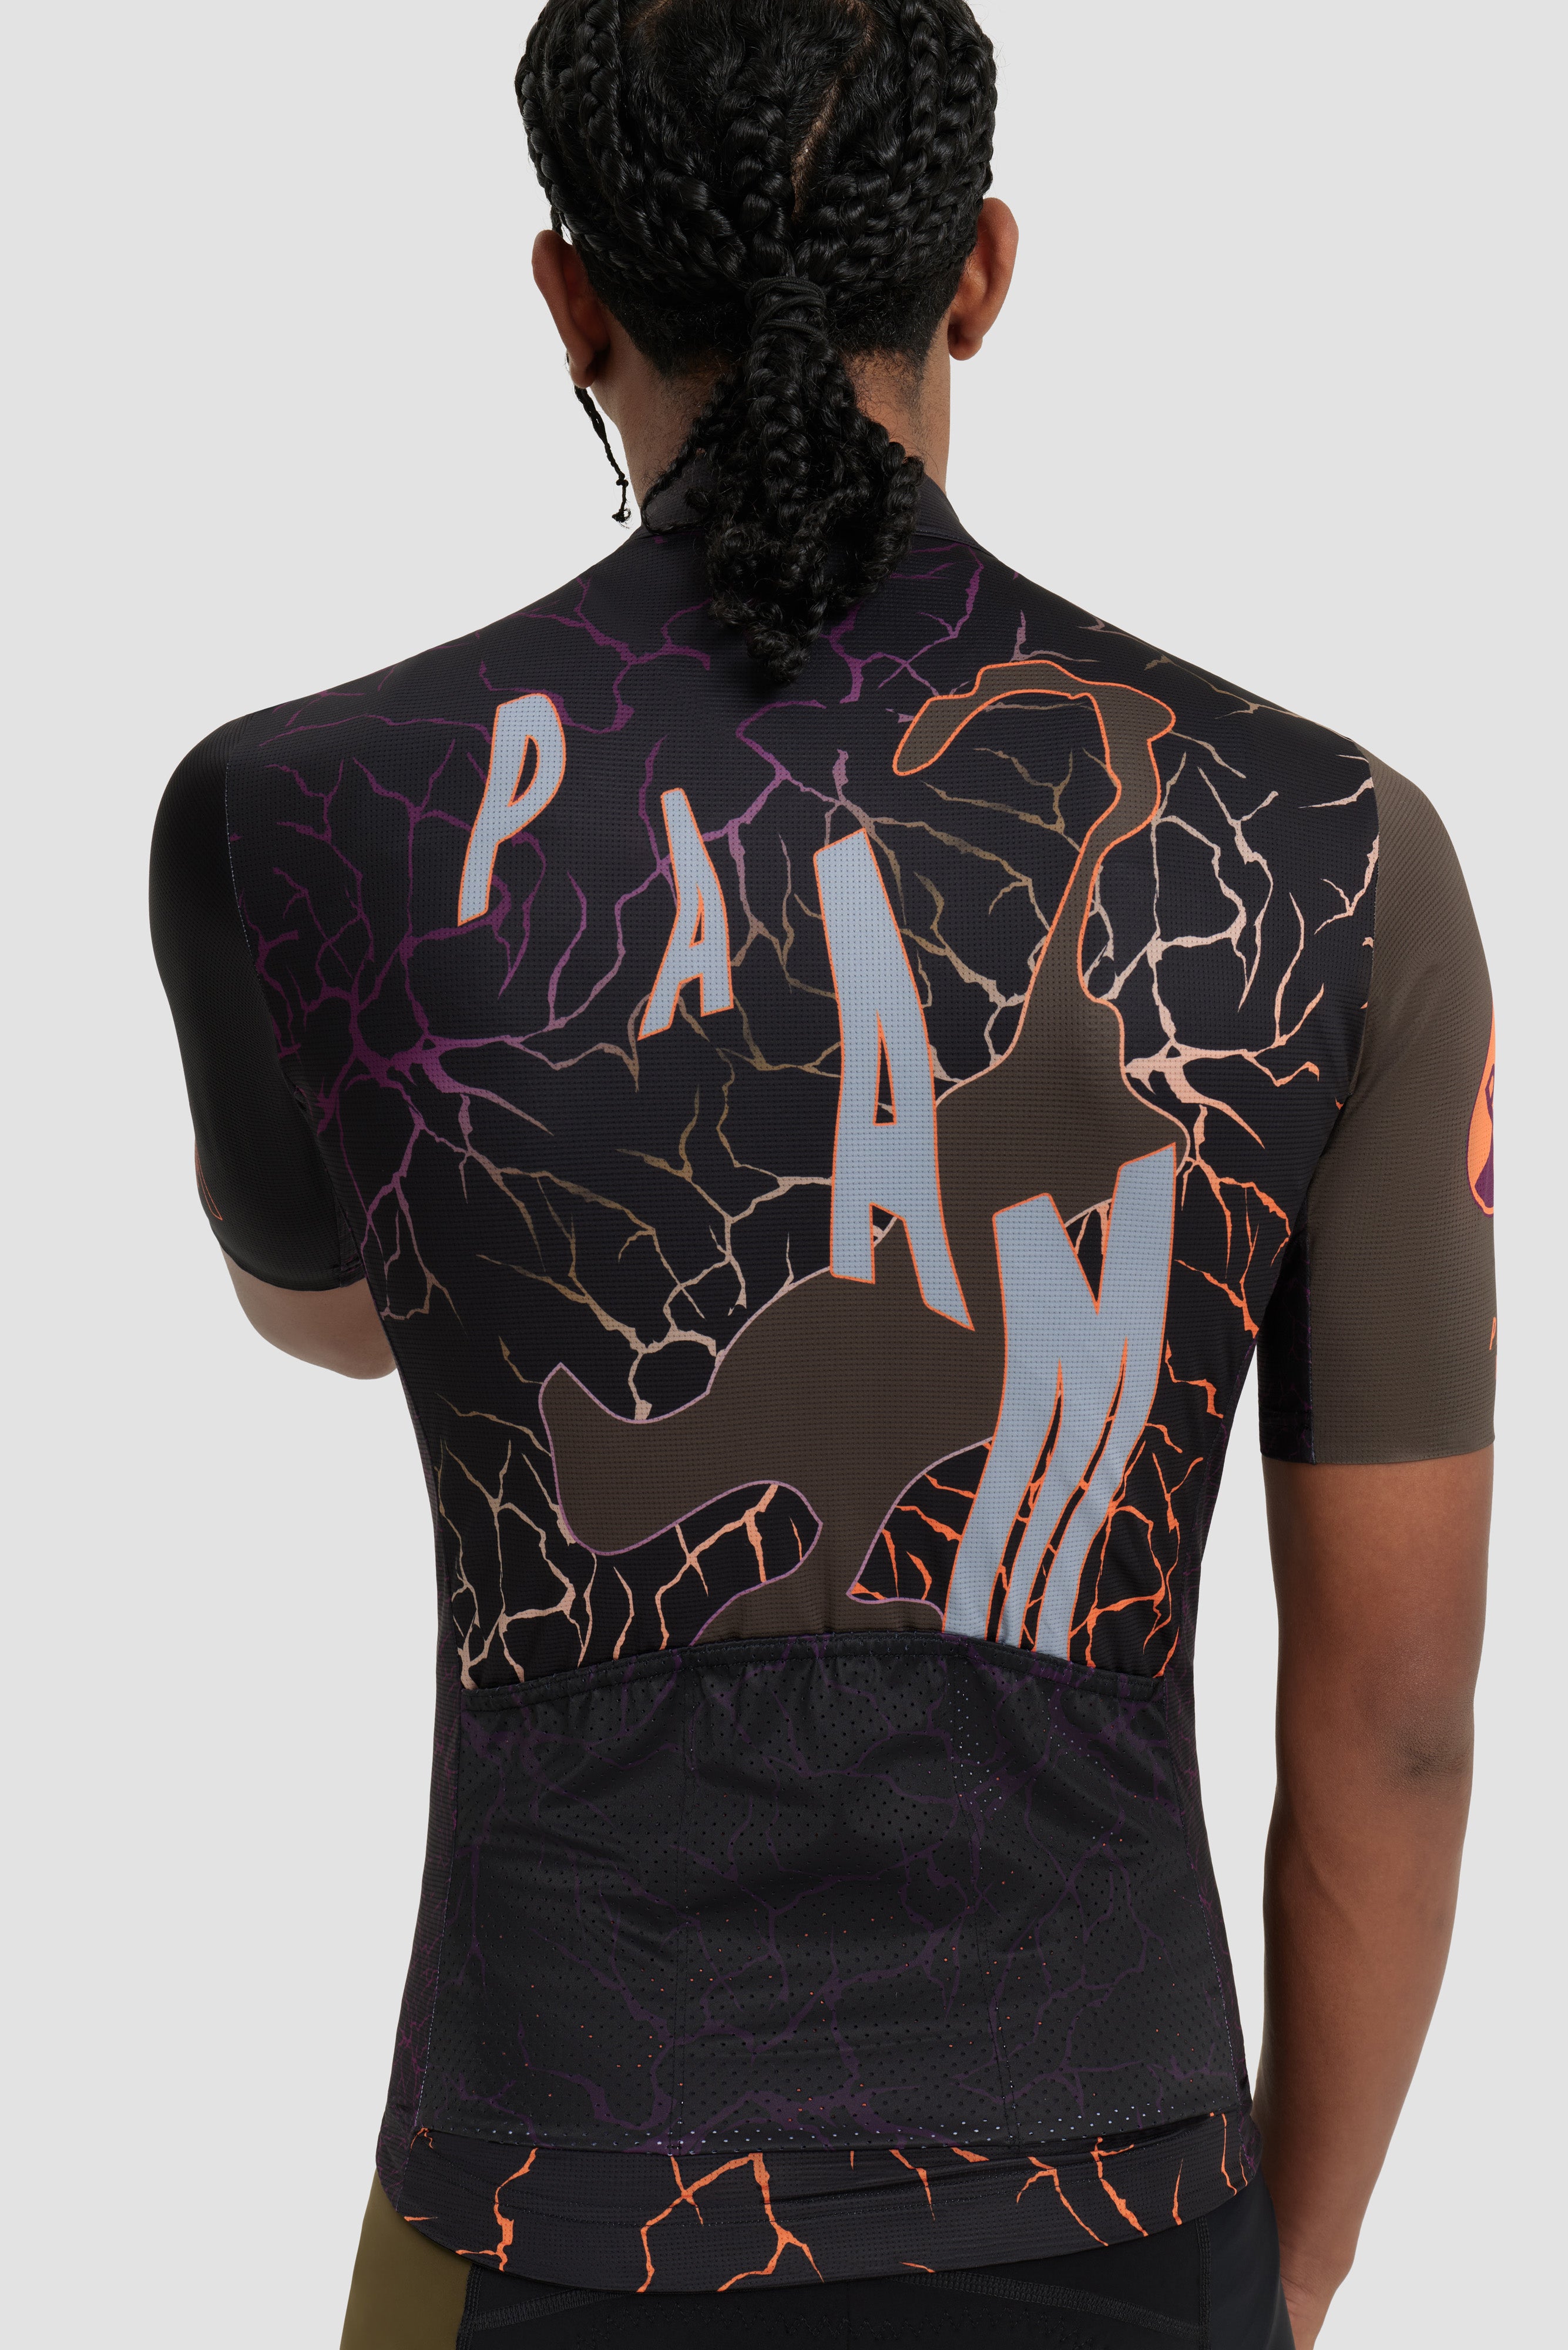 The PAAM 2.0 WILD TEAM JERSEY  available online with global shipping, and in PAM Stores Melbourne and Sydney.